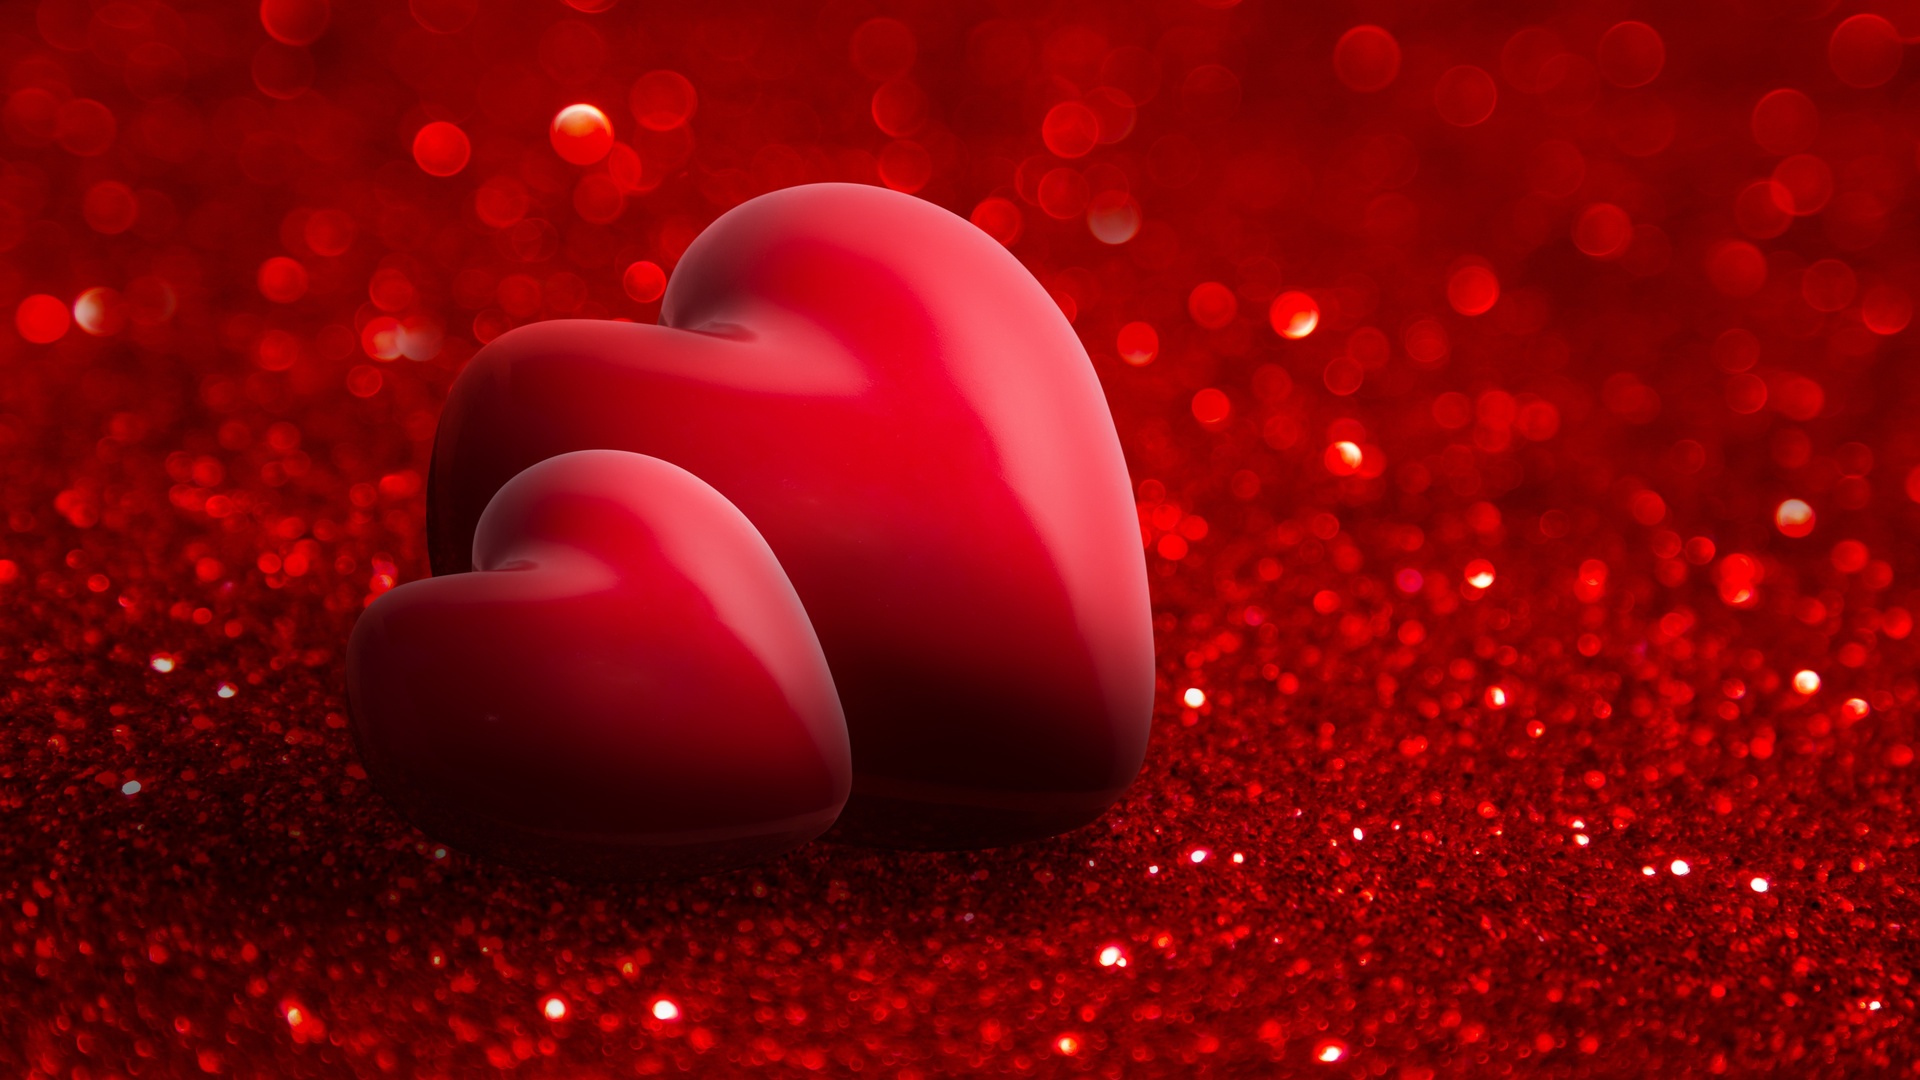 Beautiful Romantic Love Wallpapers Download 59 New Love Photos HD